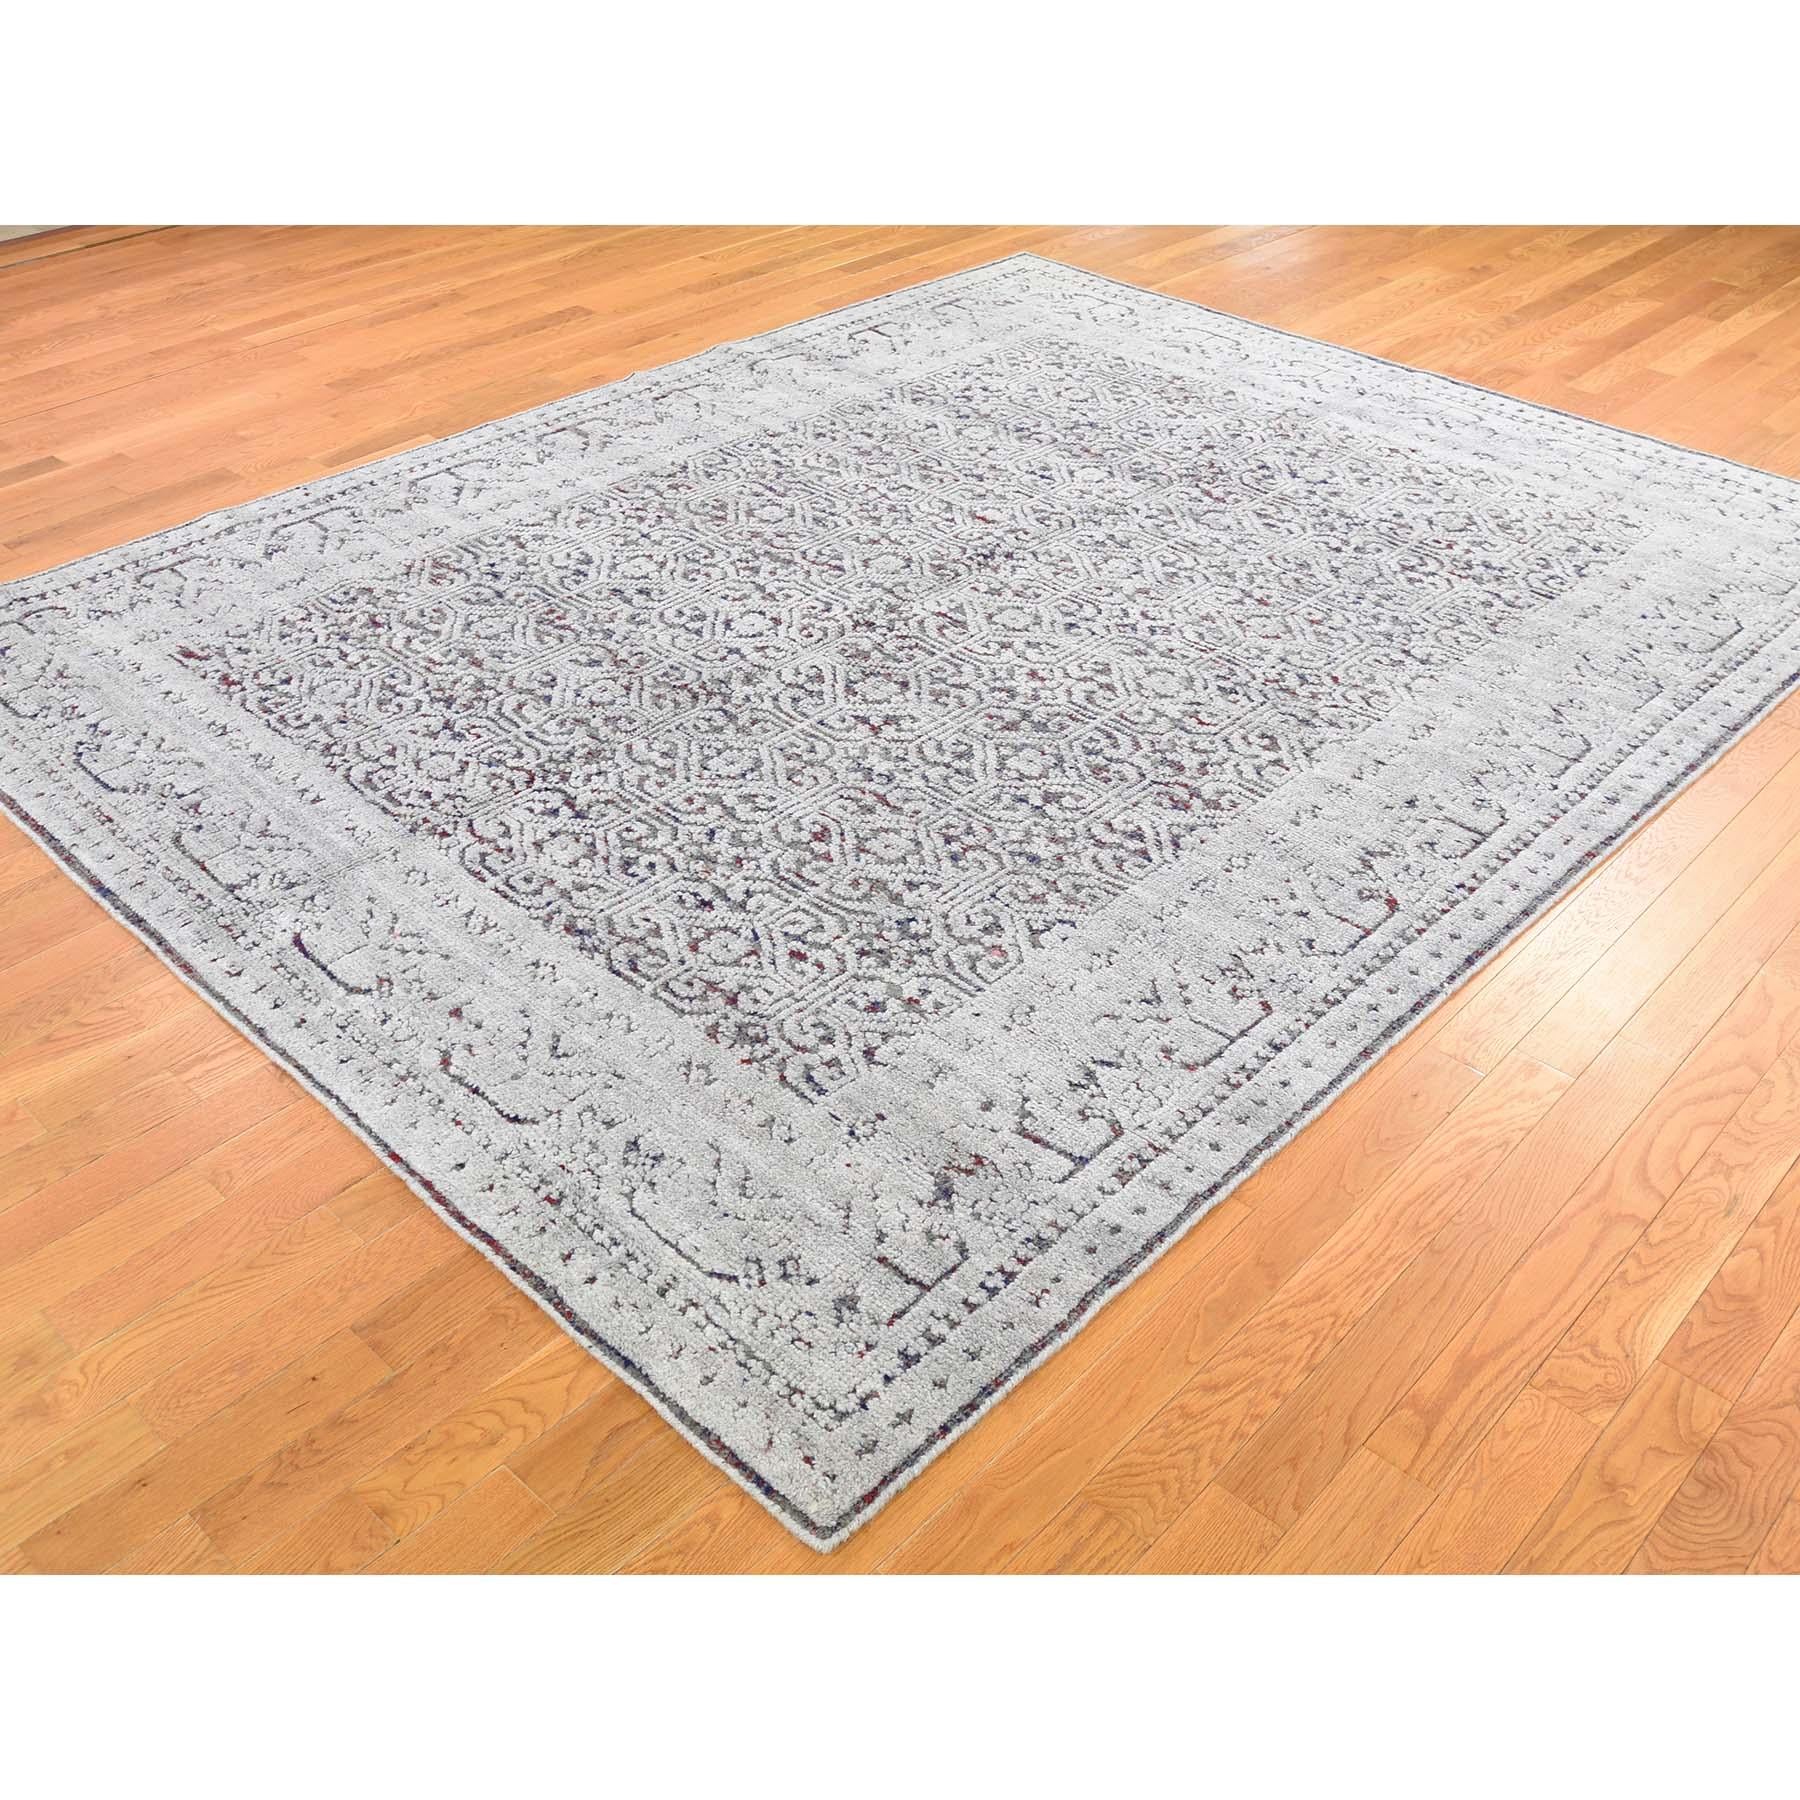 Hand-Knotted Hi-Low Pile Oxidized Wool Khotan Design Hand Knotted Oriental Rug